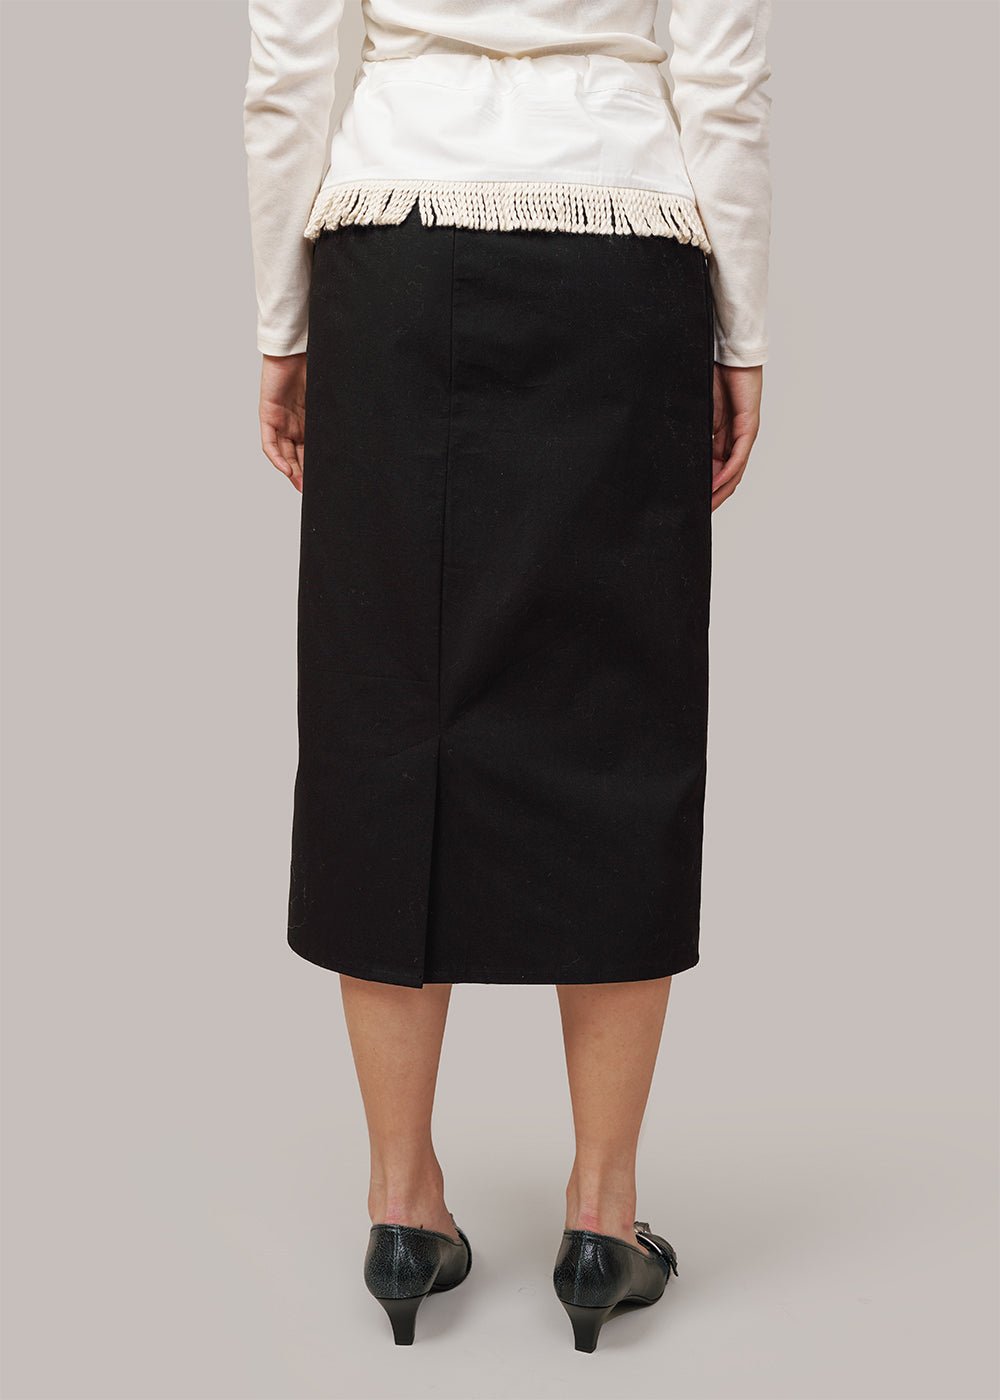 By Signe Black/White Frill Skirt - New Classics Studios Sustainable Ethical Fashion Canada